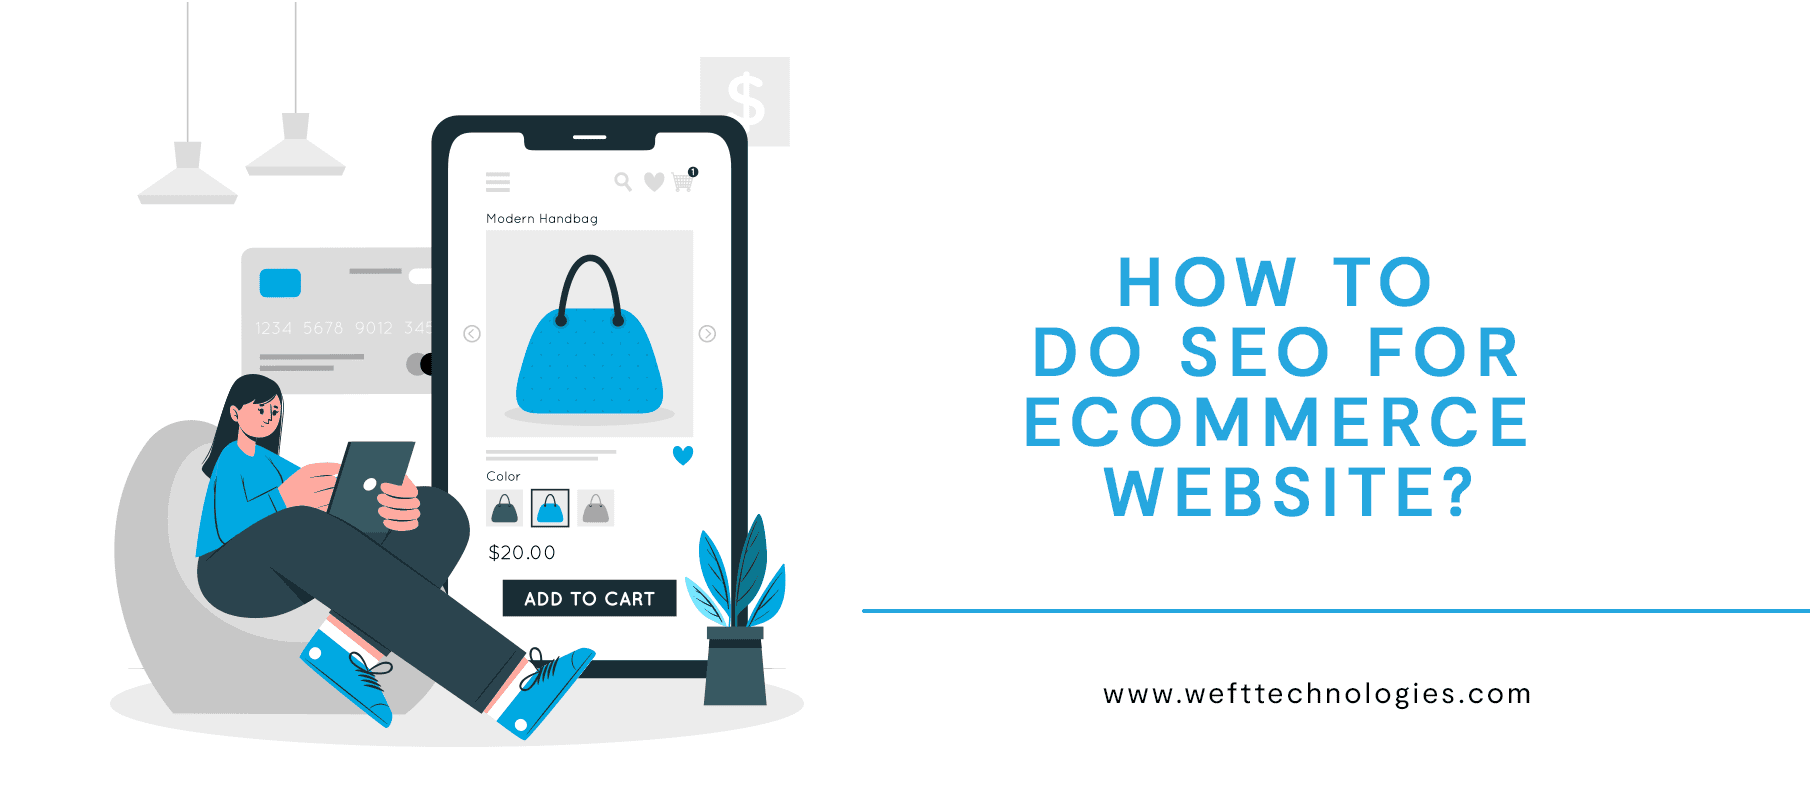 How to do SEO for eCommerce websites?